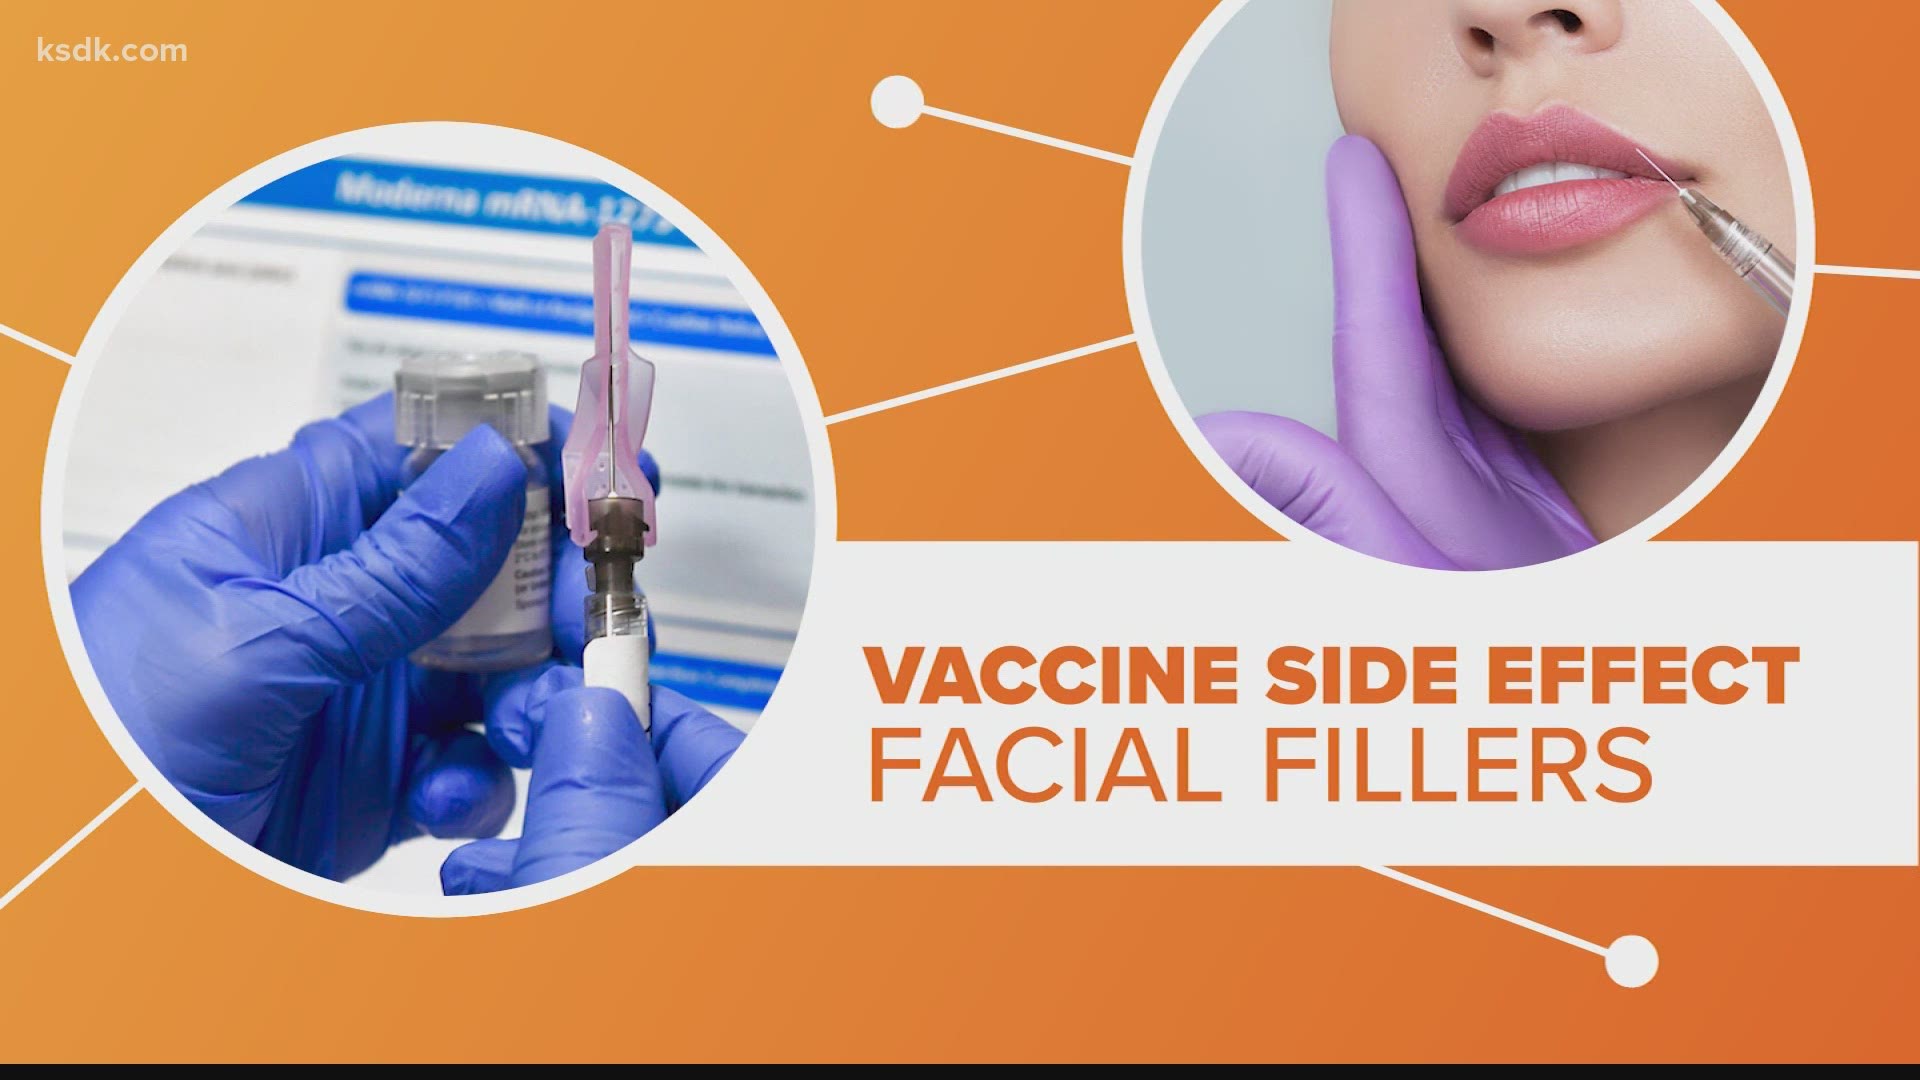 The FDA has a warning about an unusual side effect for the Moderna coronavirus vaccine for patients with cosmetic facial fillers